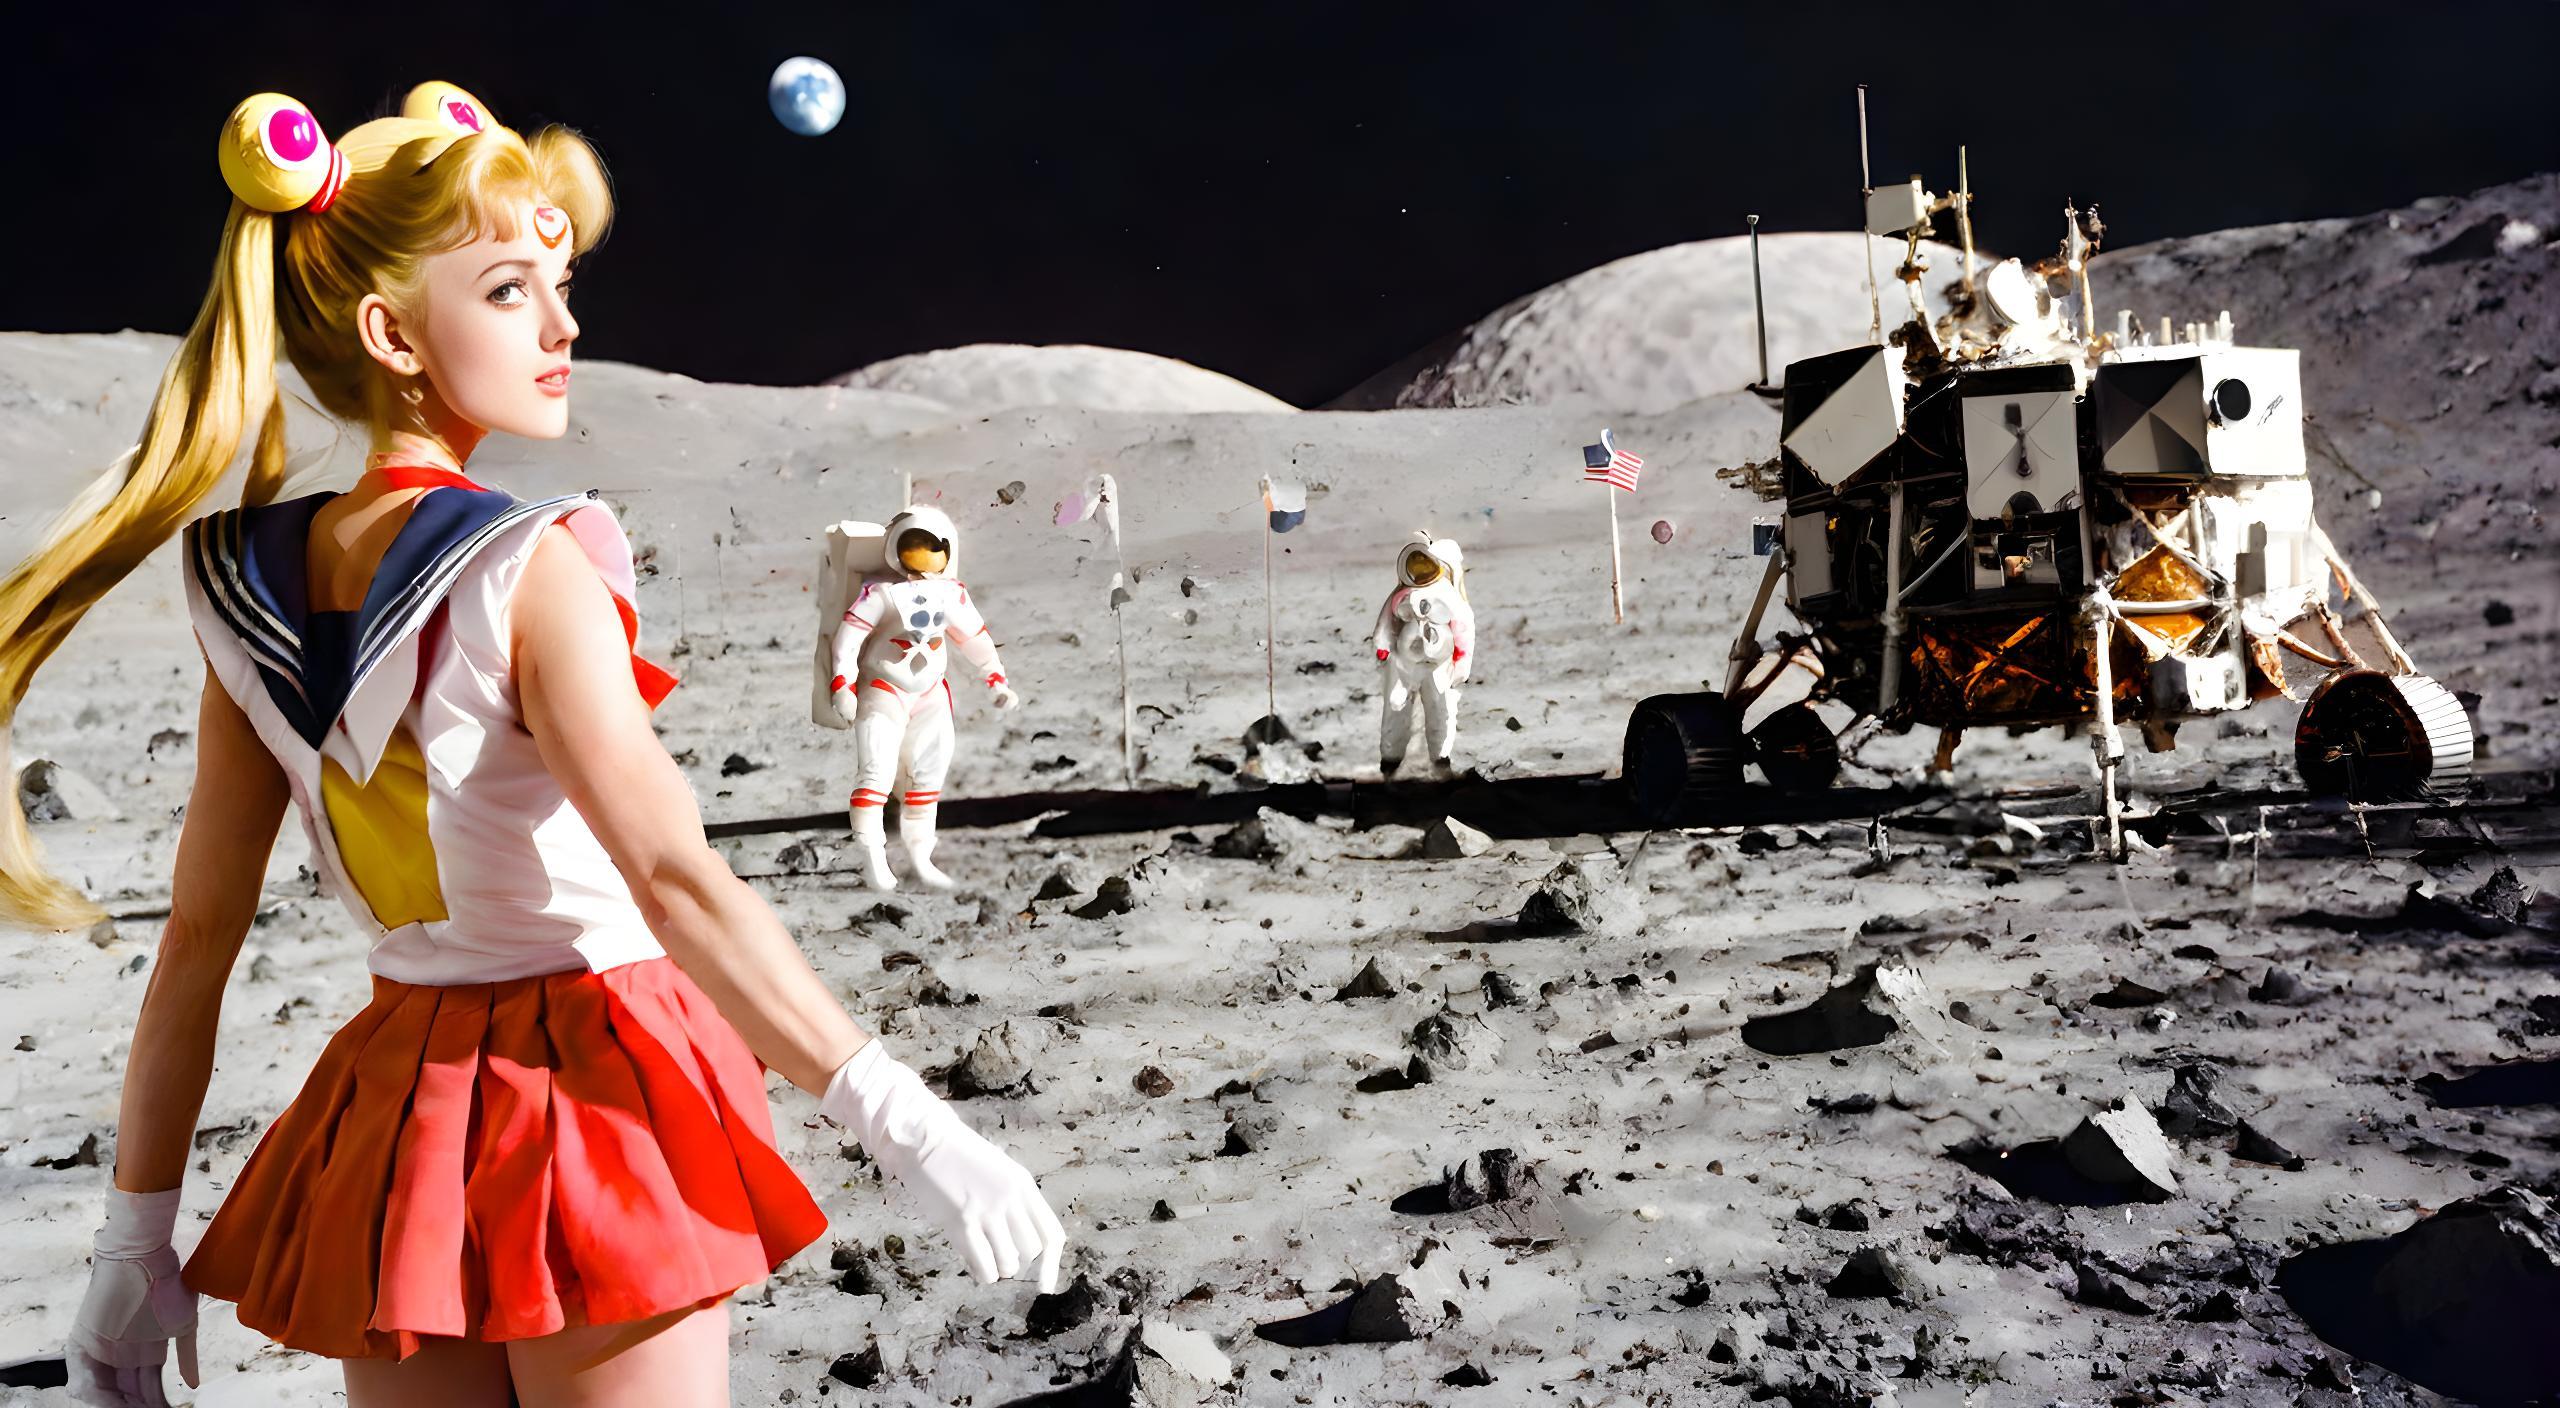 a historical film still of Sailor Moon with astronauts landed on the moon first time in 1969. film photography style, HDR